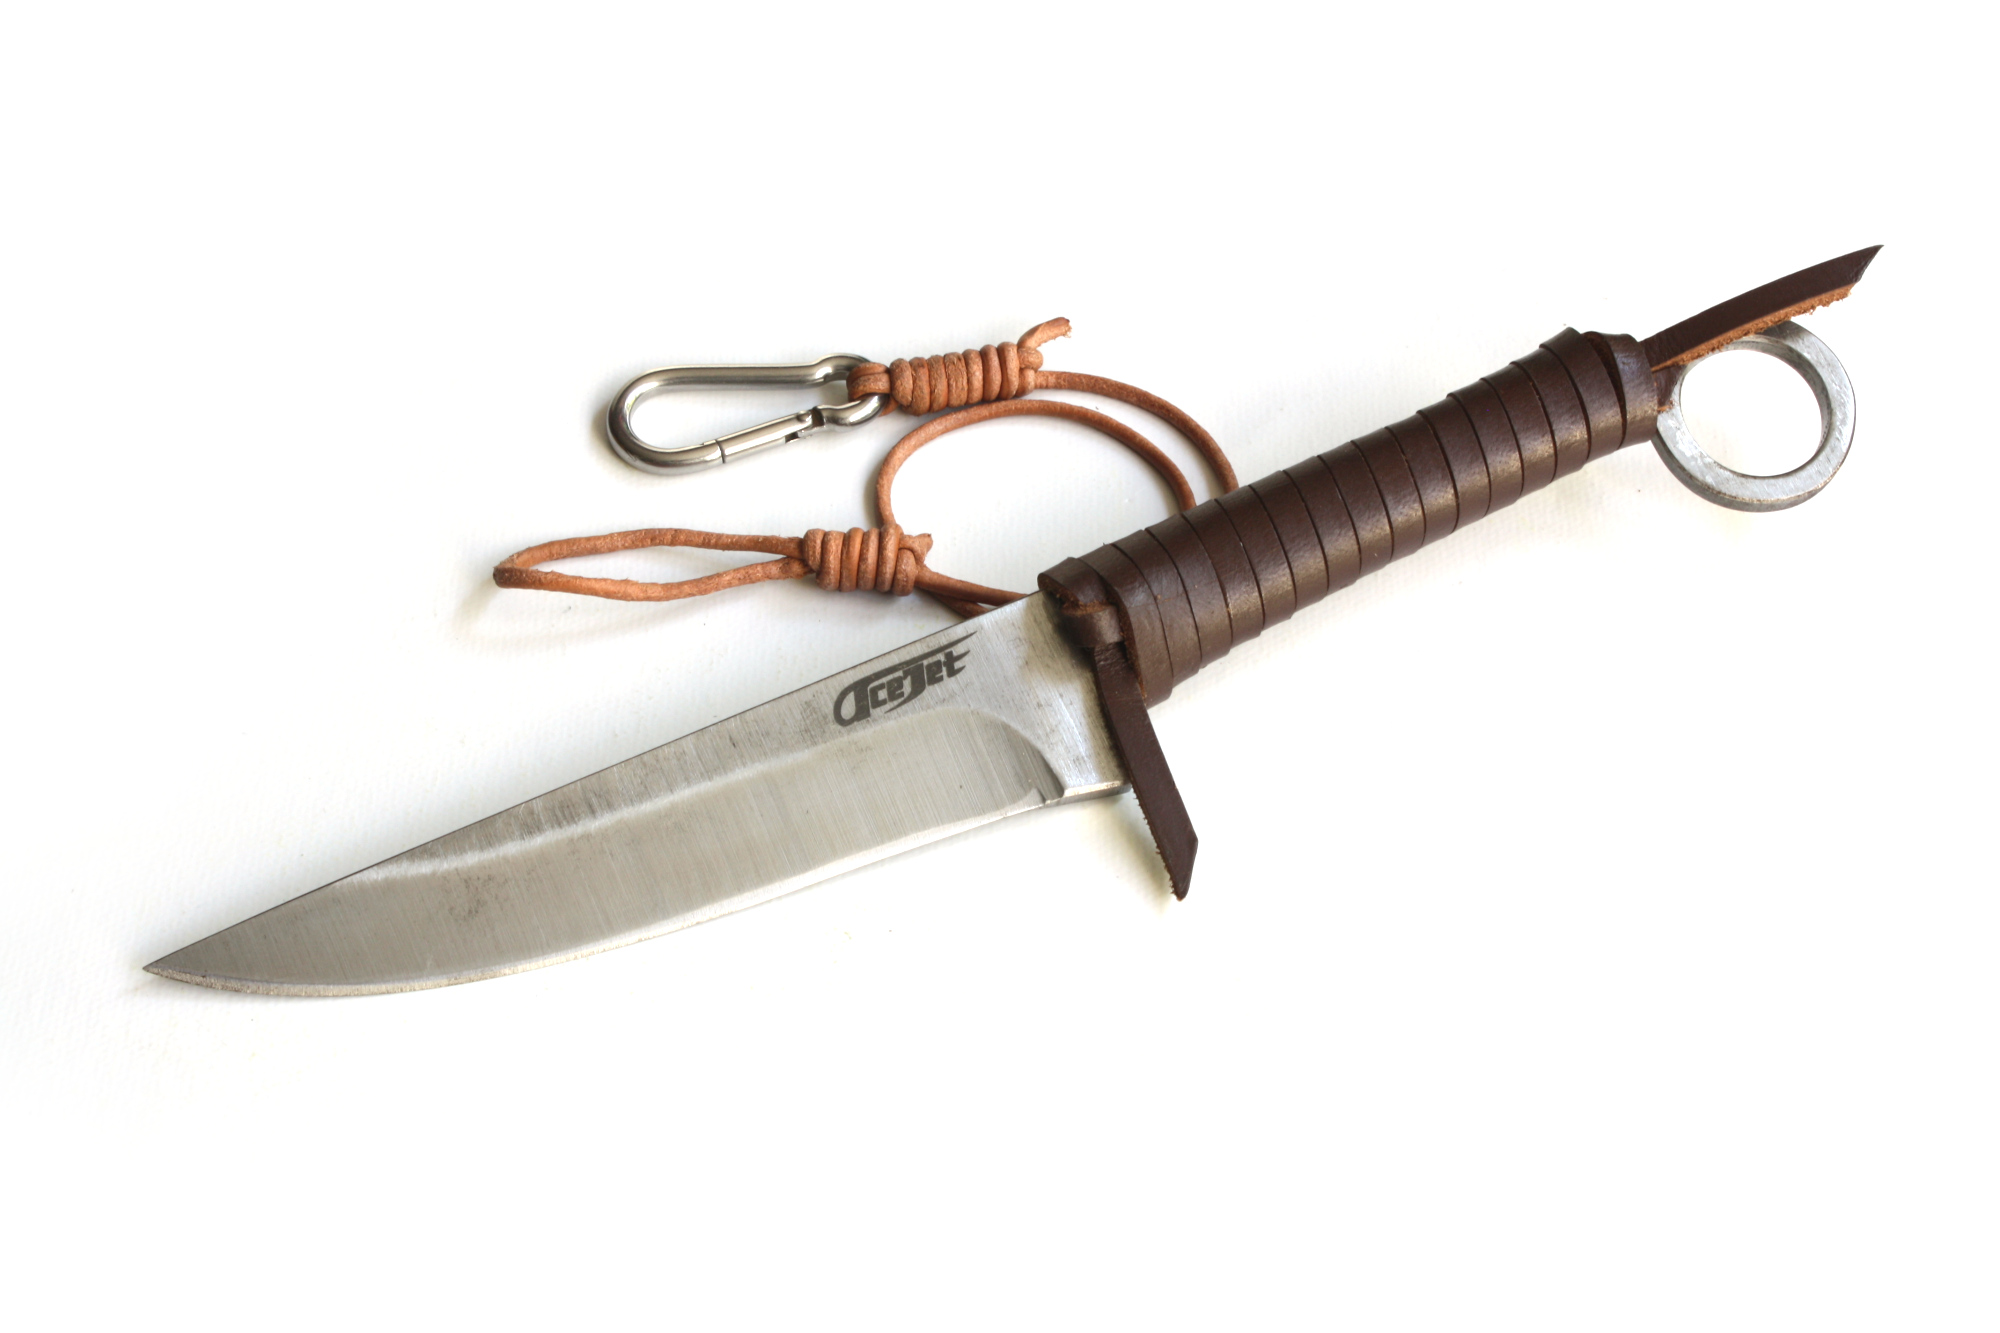 ACEJET Classic Celtic Knife - 12", Brown Cord